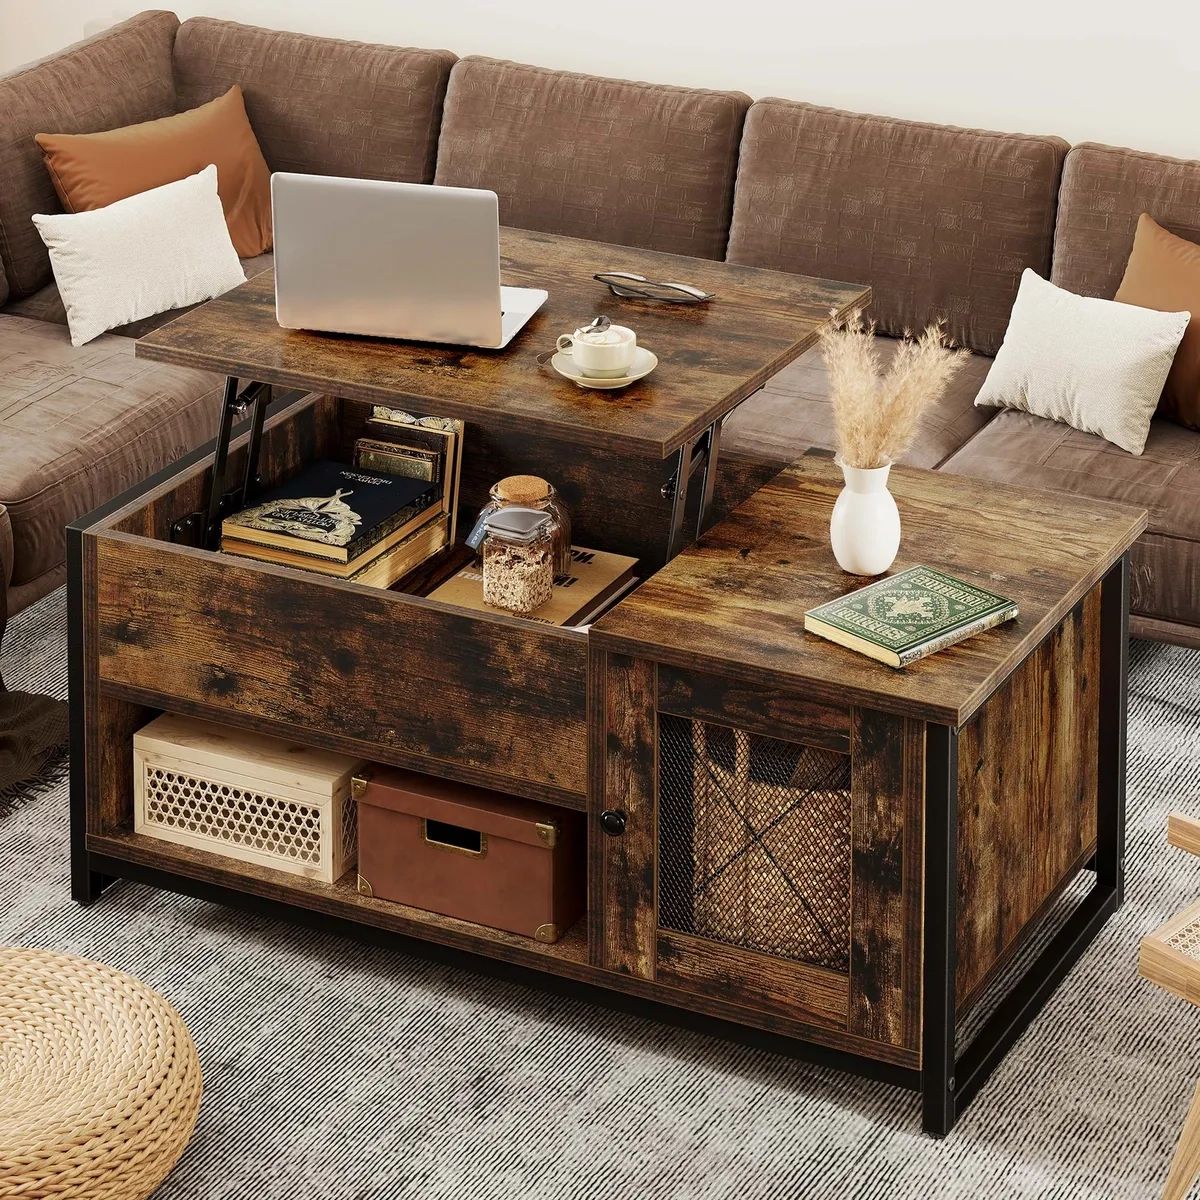 Farmhouse Lift Top Coffee Table With Hidden Compartment And Storage Shelf  Brown | Ebay For Lift Top Coffee Tables With Shelves (Photo 7 of 15)